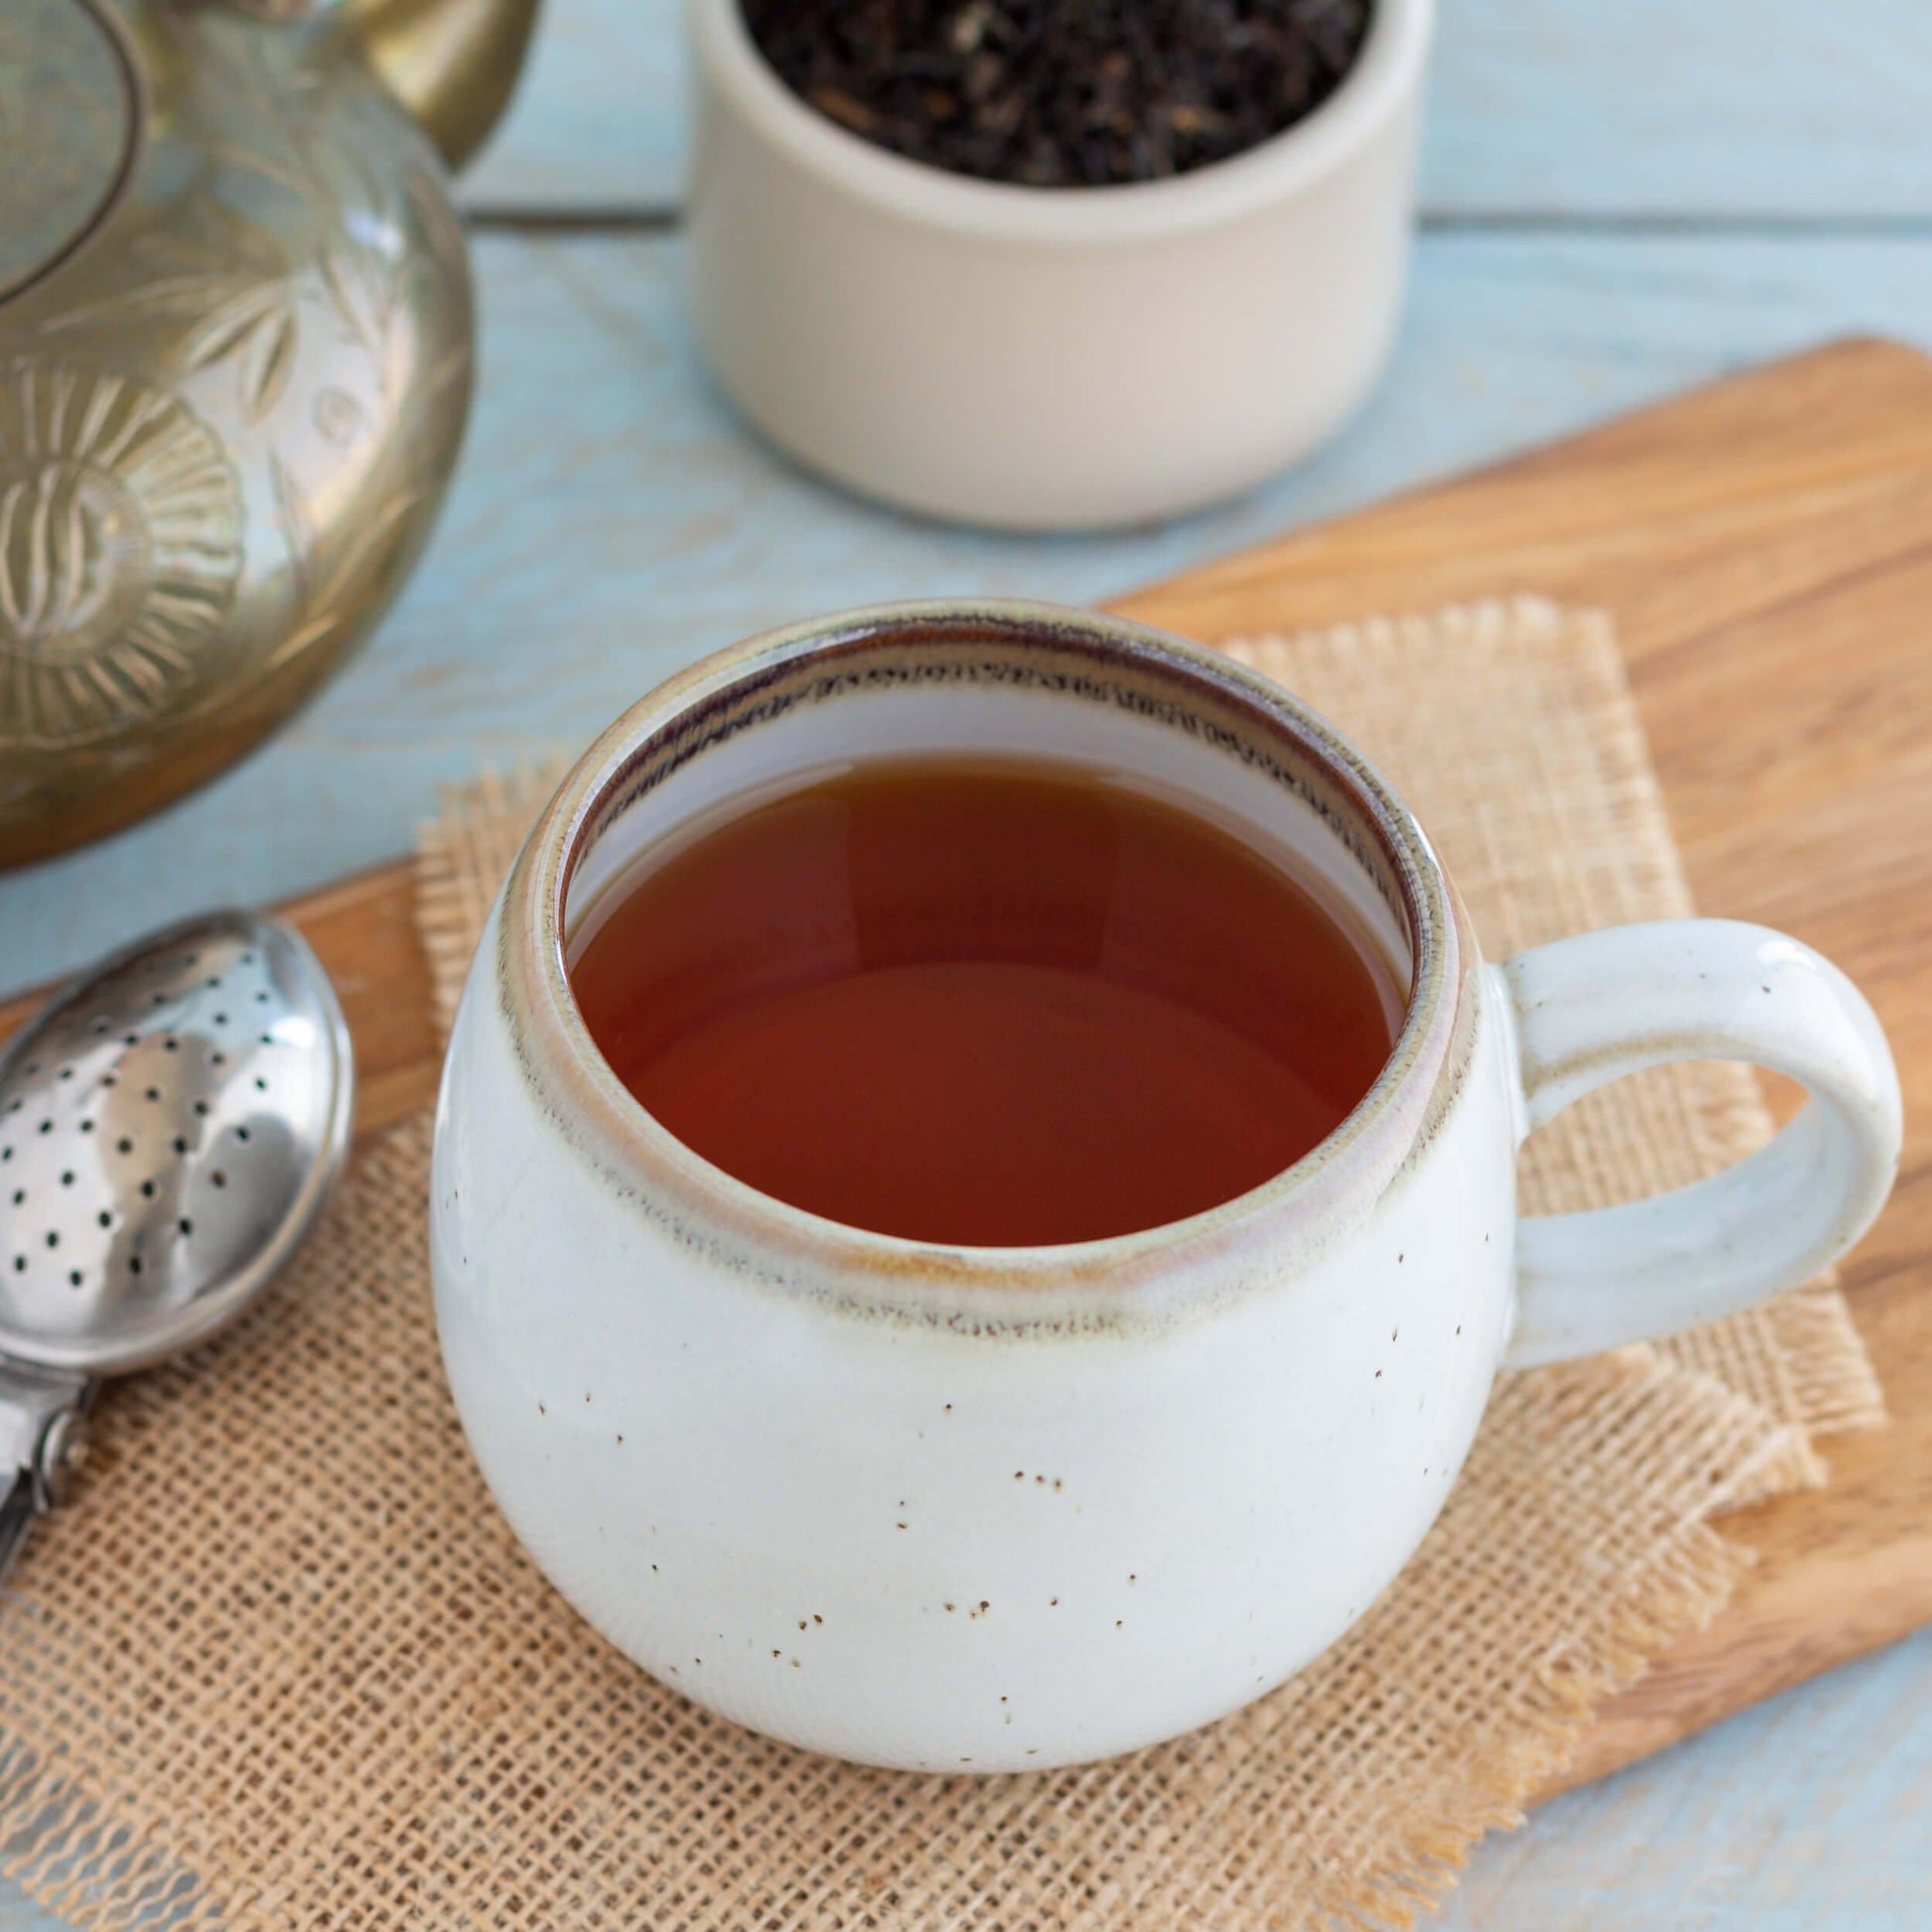 Star of India Black Tea shown as brewed tea in a round white  speckled mug, displayed on squares of burlap on top of a wooden board, with a metal tea infuser nearby